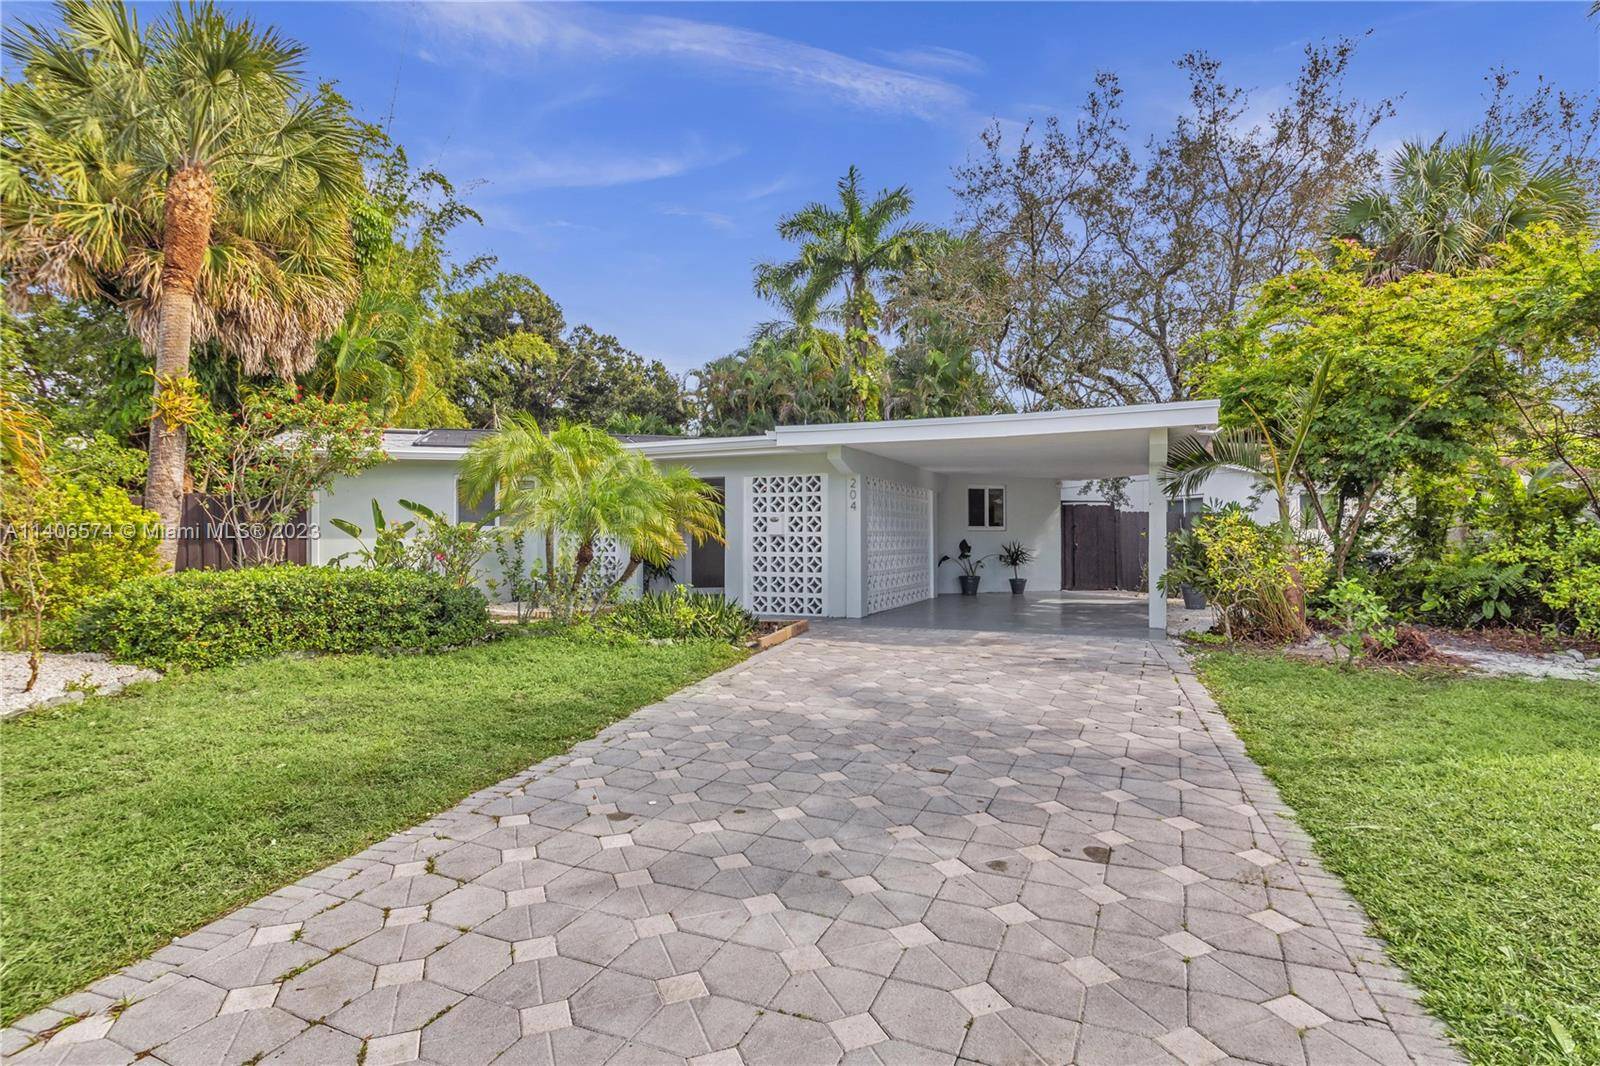 INVESTMENT OPPORTUNITY ! Introducing a stunning, fully remodeled gem nestled in the vibrant city of Fort Lauderdale.